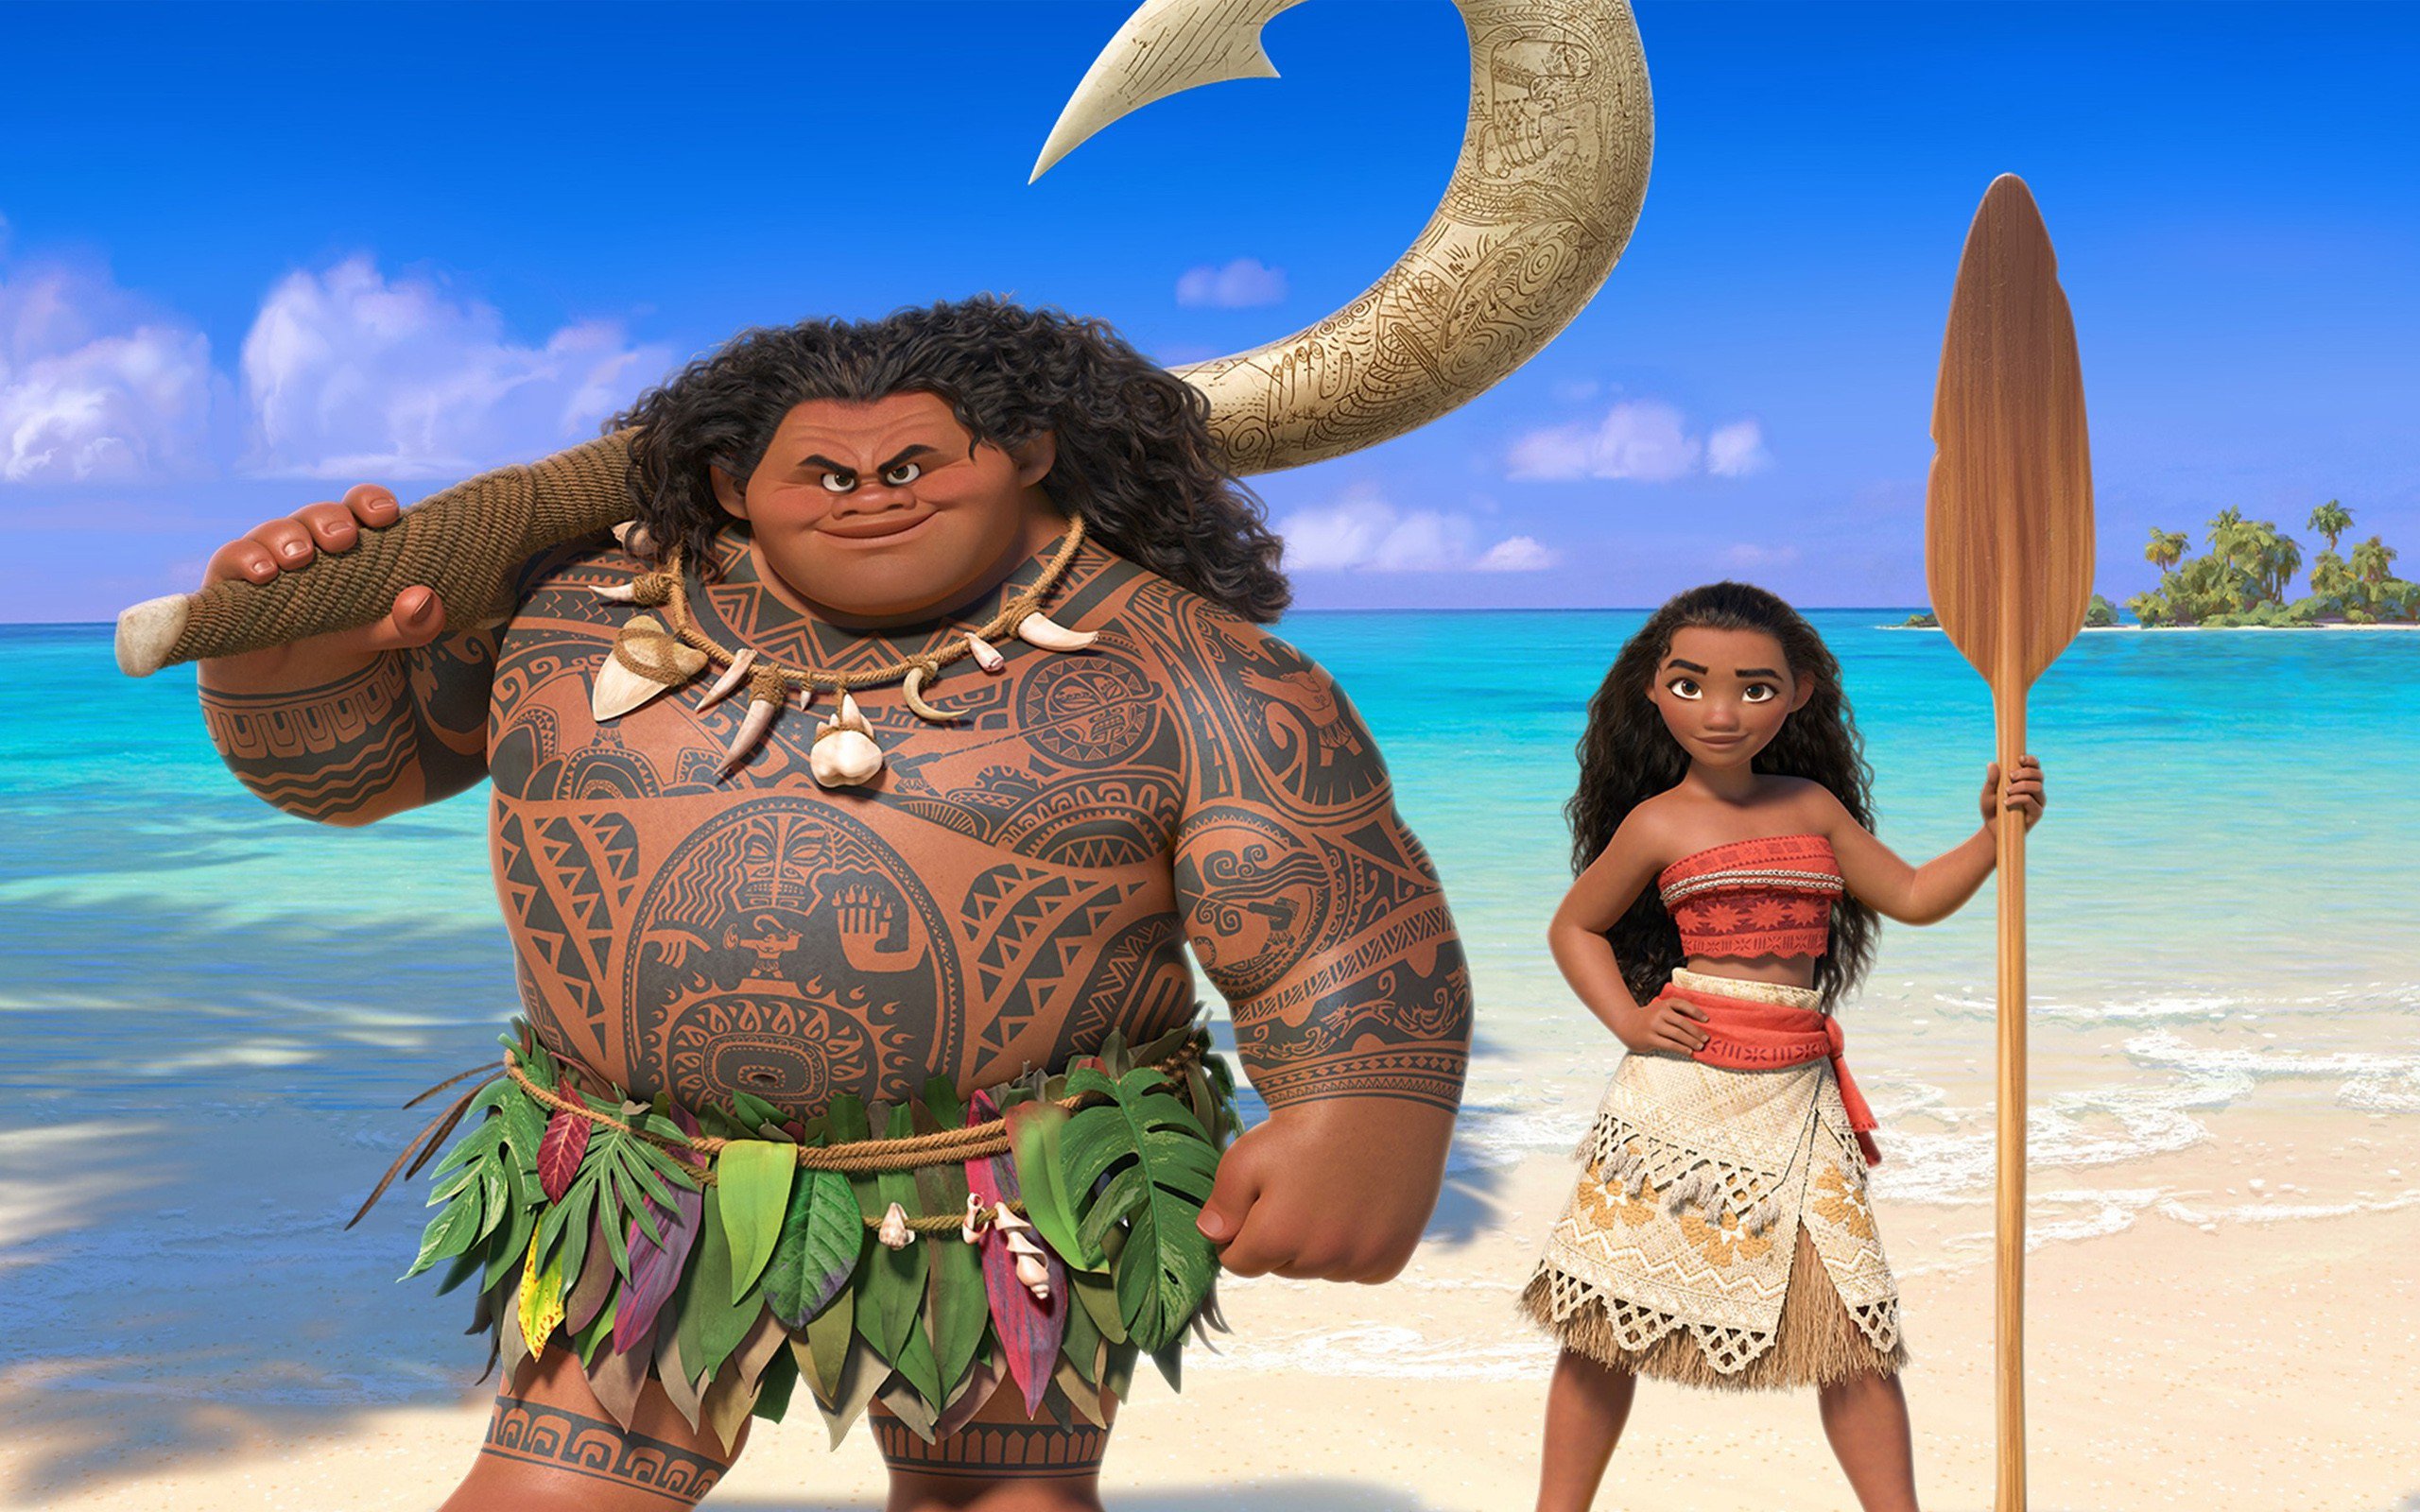 3 Reasons You Should Be Excited for Disney’s “Moana”